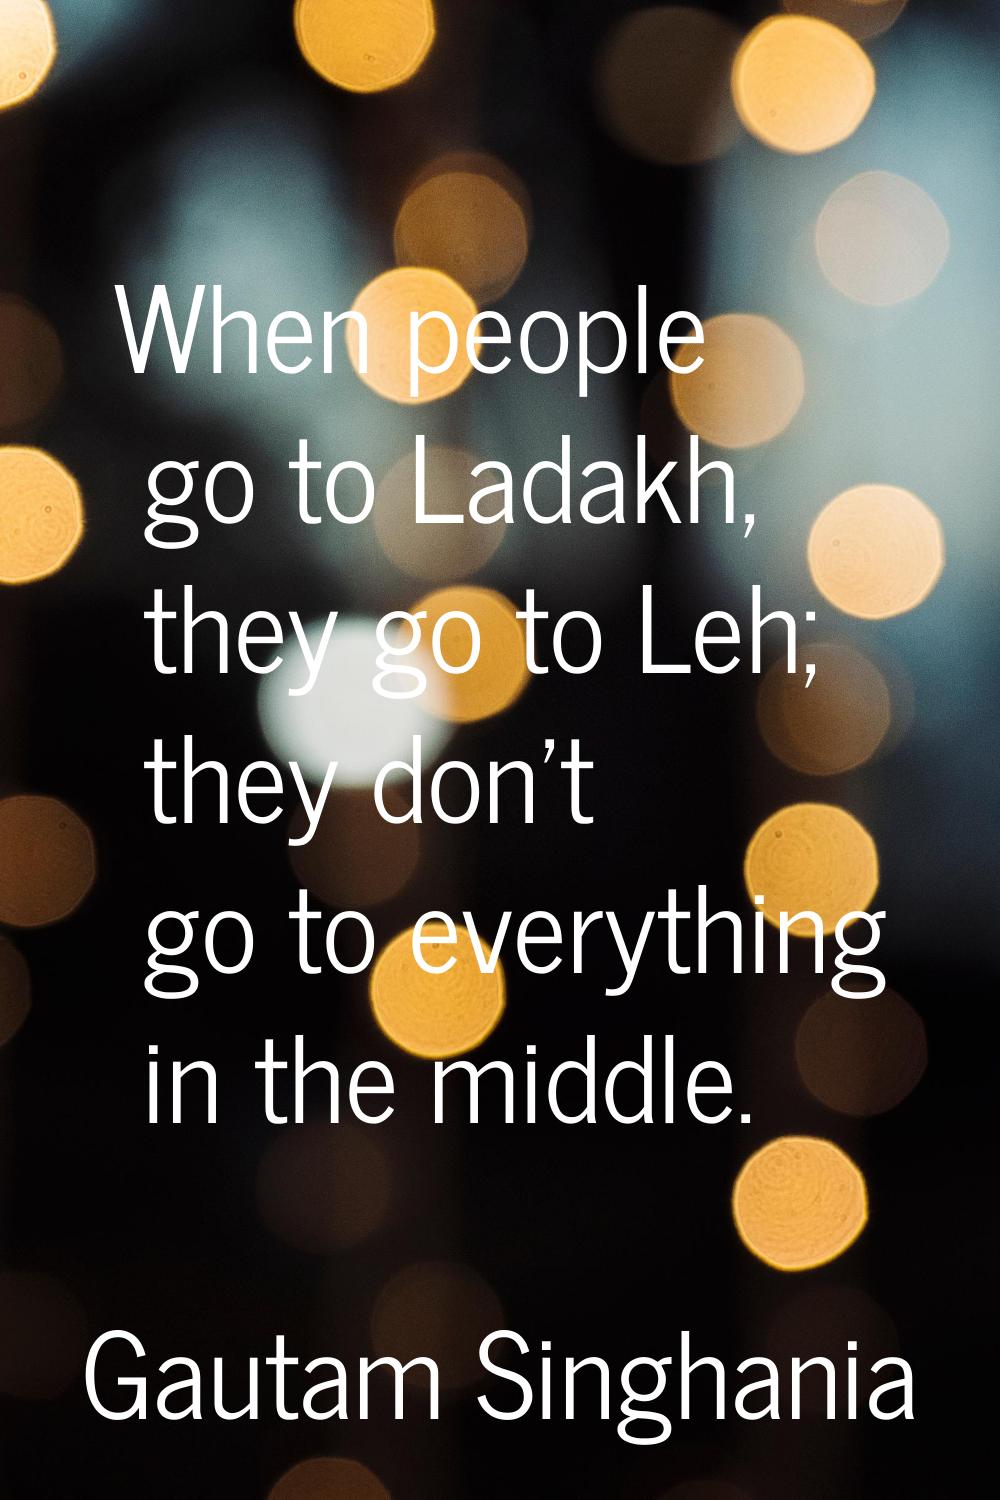 When people go to Ladakh, they go to Leh; they don't go to everything in the middle.